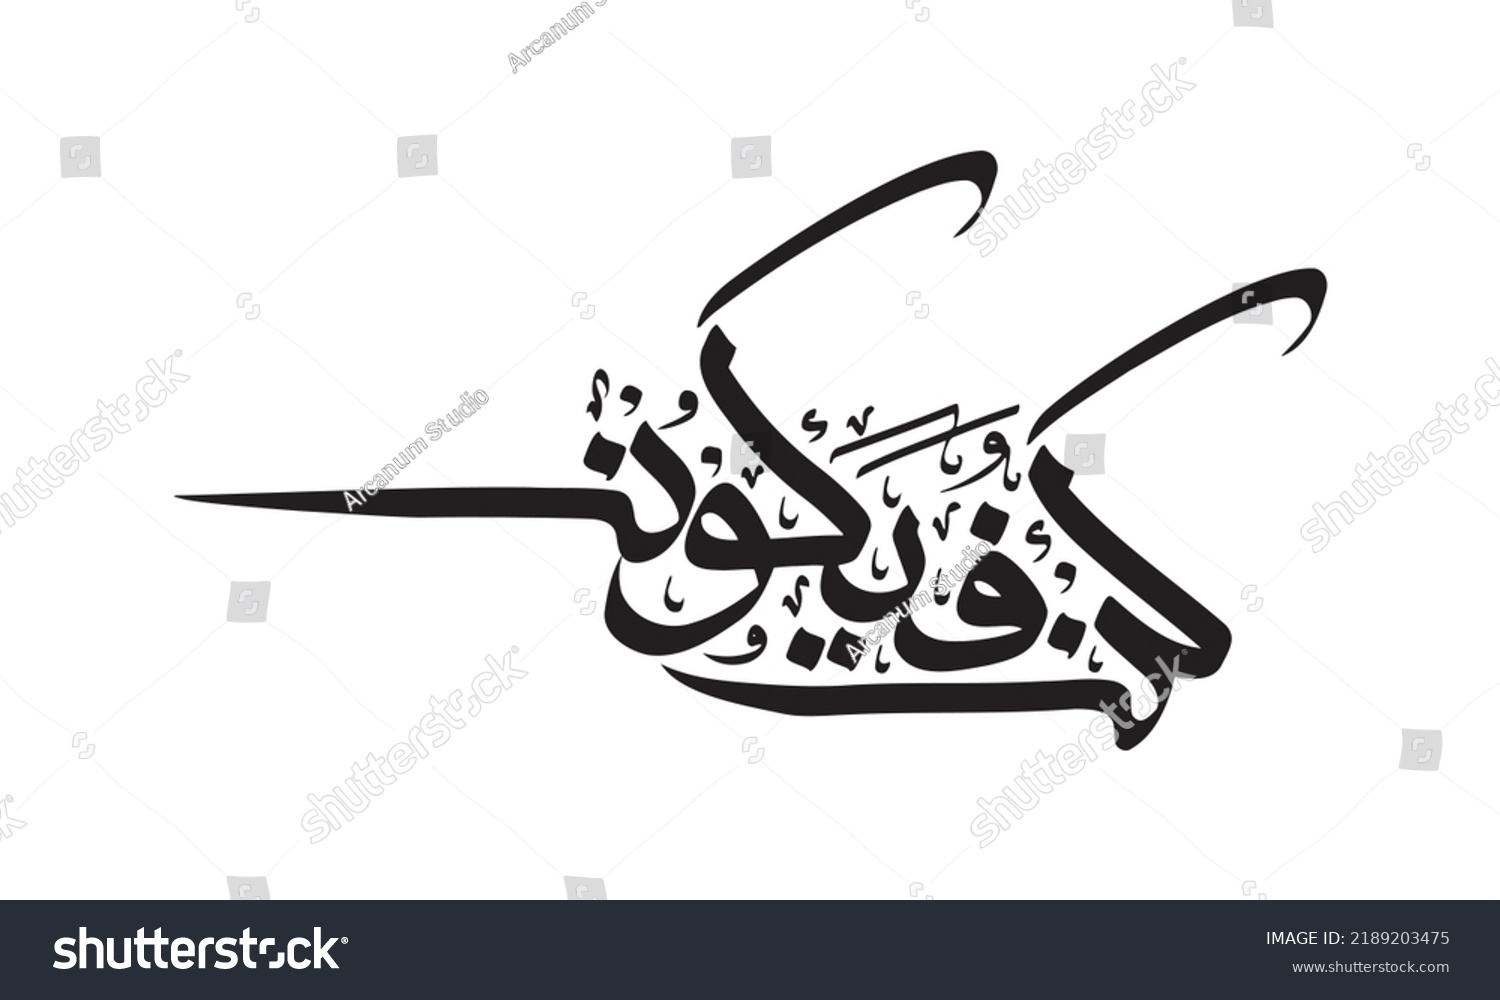 SVG of Simple Black and White Arabic Calligraphy of 